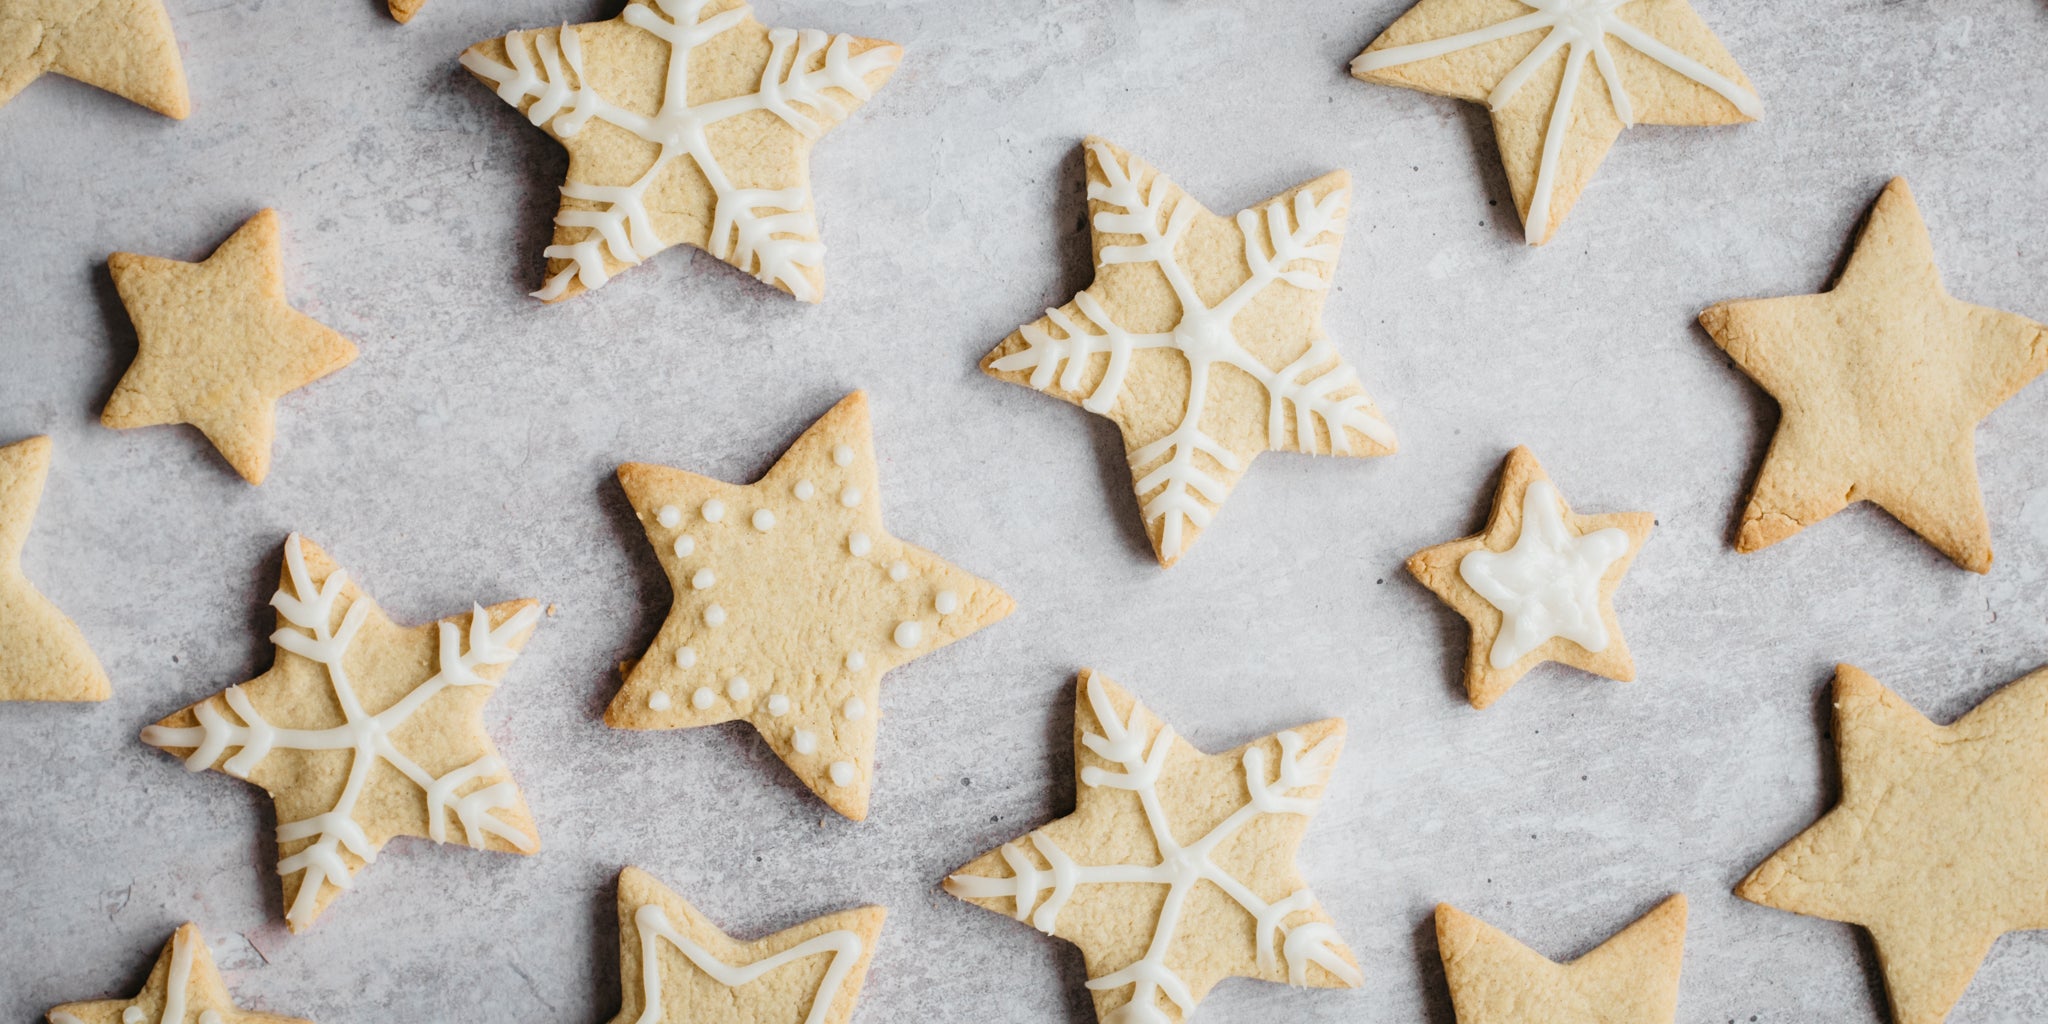 Top down shot of star shaped biscuits piped with white icing in snowflake design